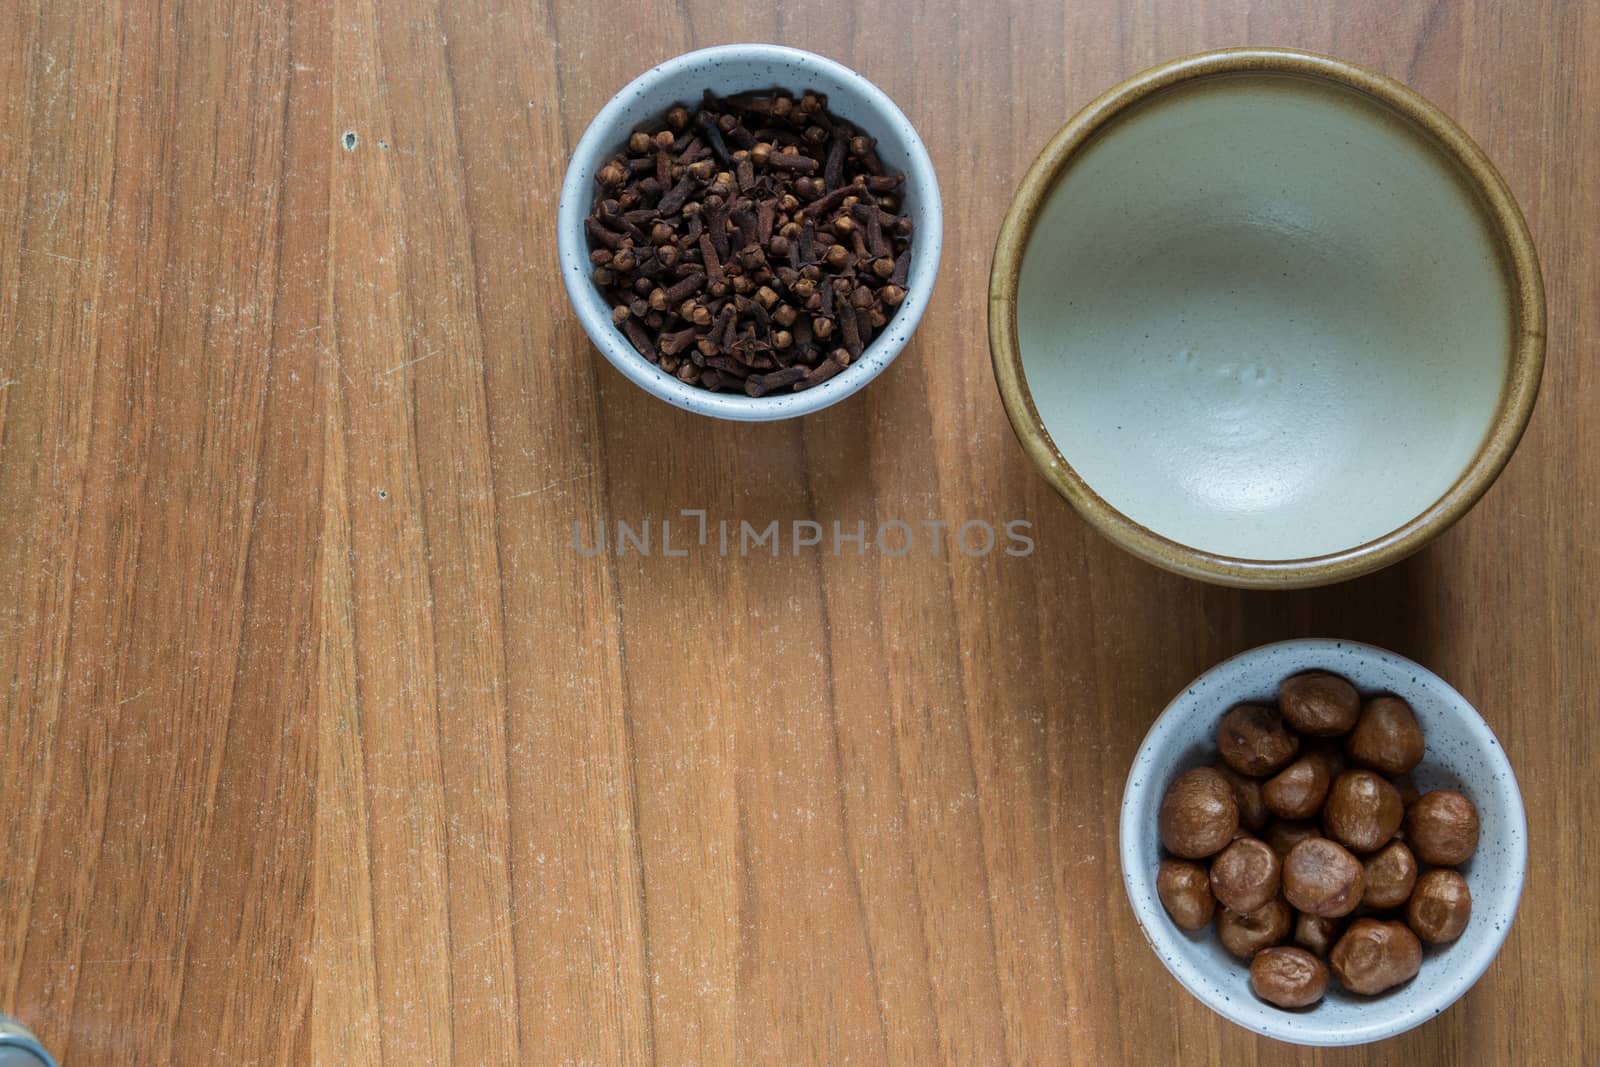 Set of some spices on a wood background